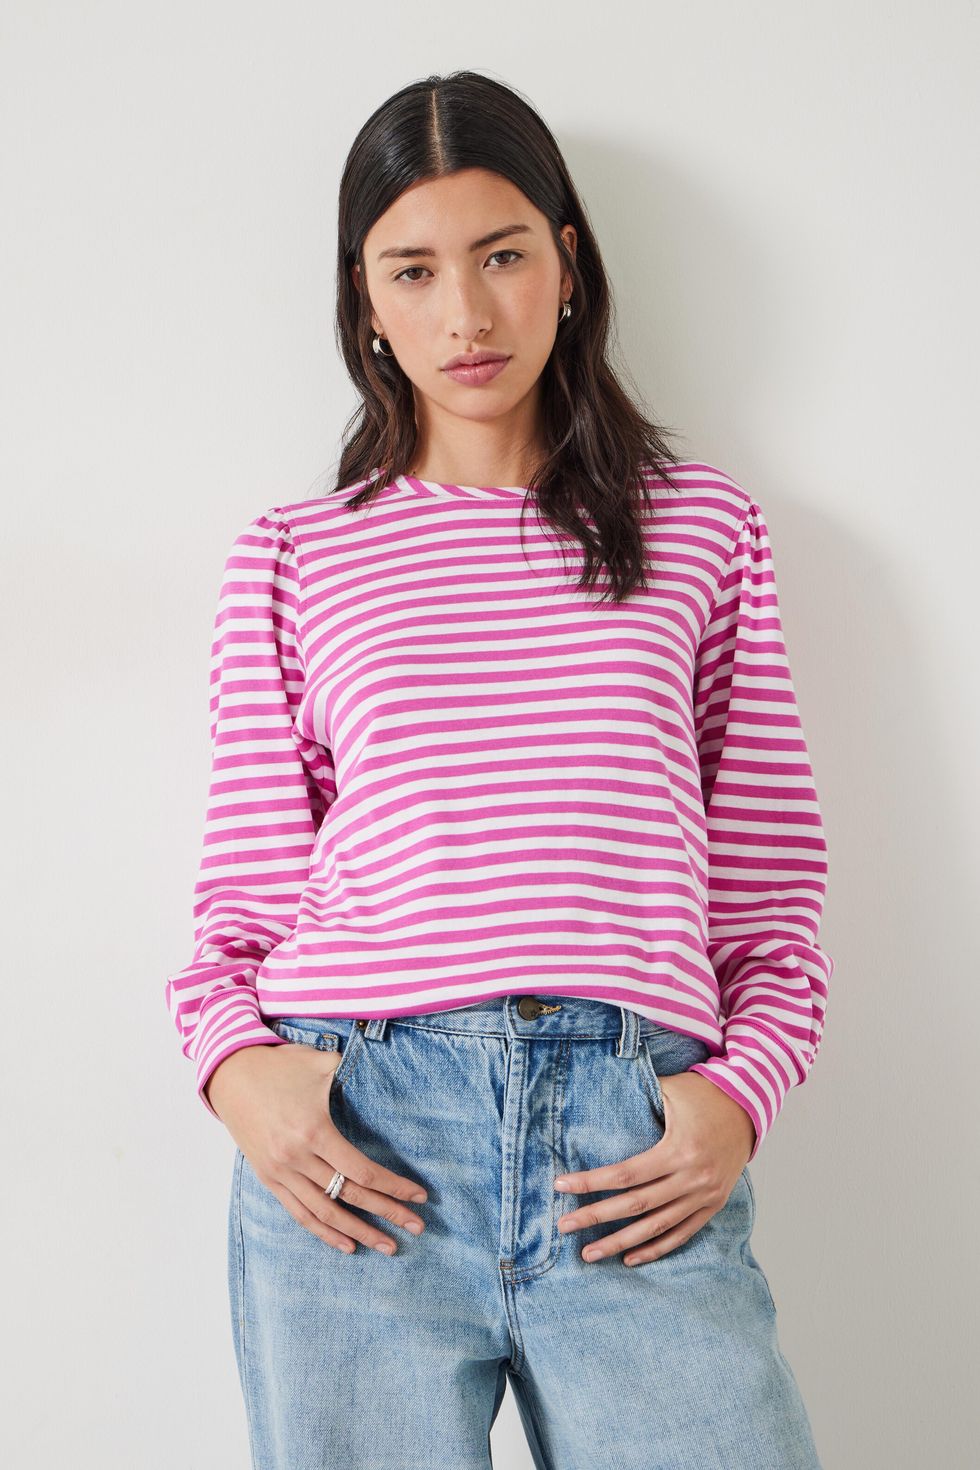 Emily Striped Puff Sleeve Top